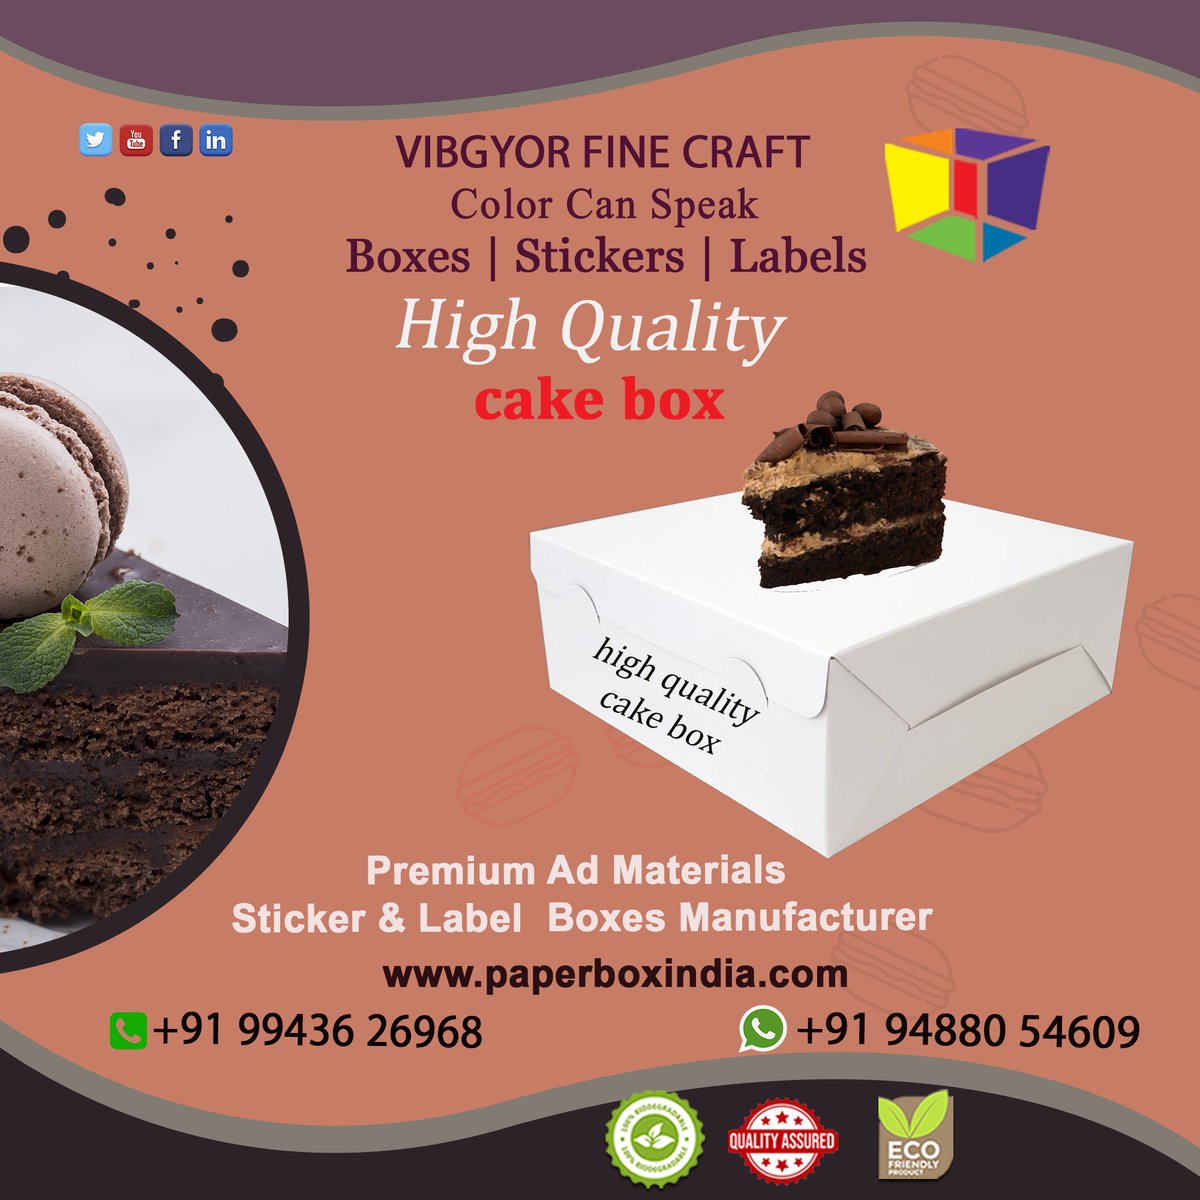 VIBGYOR FINE CRAFT
MANUFACTURER OF HIGH QUALITY  CAKE BOXES
✔️Cake Box
☎call us for more details : 9943626968 | 094880 54609
#manufacturing #qualitybox #CakeBox #BakeLife #CakePackaging #CakeBoxDesign #SweetTreats #DIYBaking #CakeBoxIdeas #CustomCakes #EcoFriendly #SmallBusiness